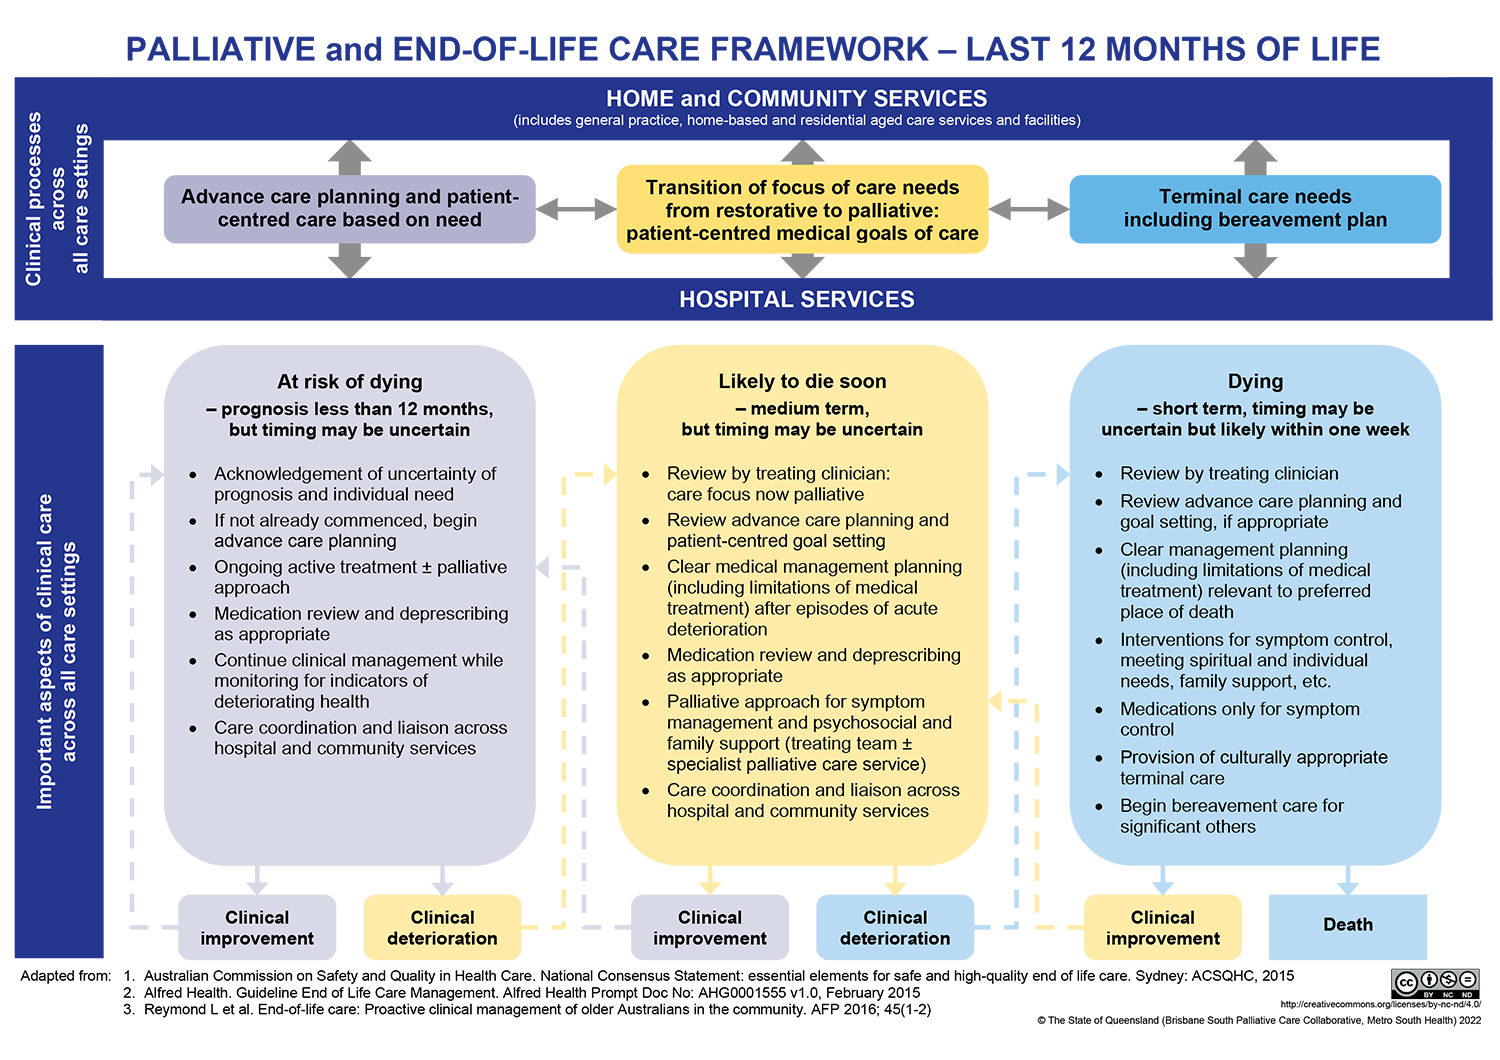 Figure 2. Framework for GPs providing care for community-based patients